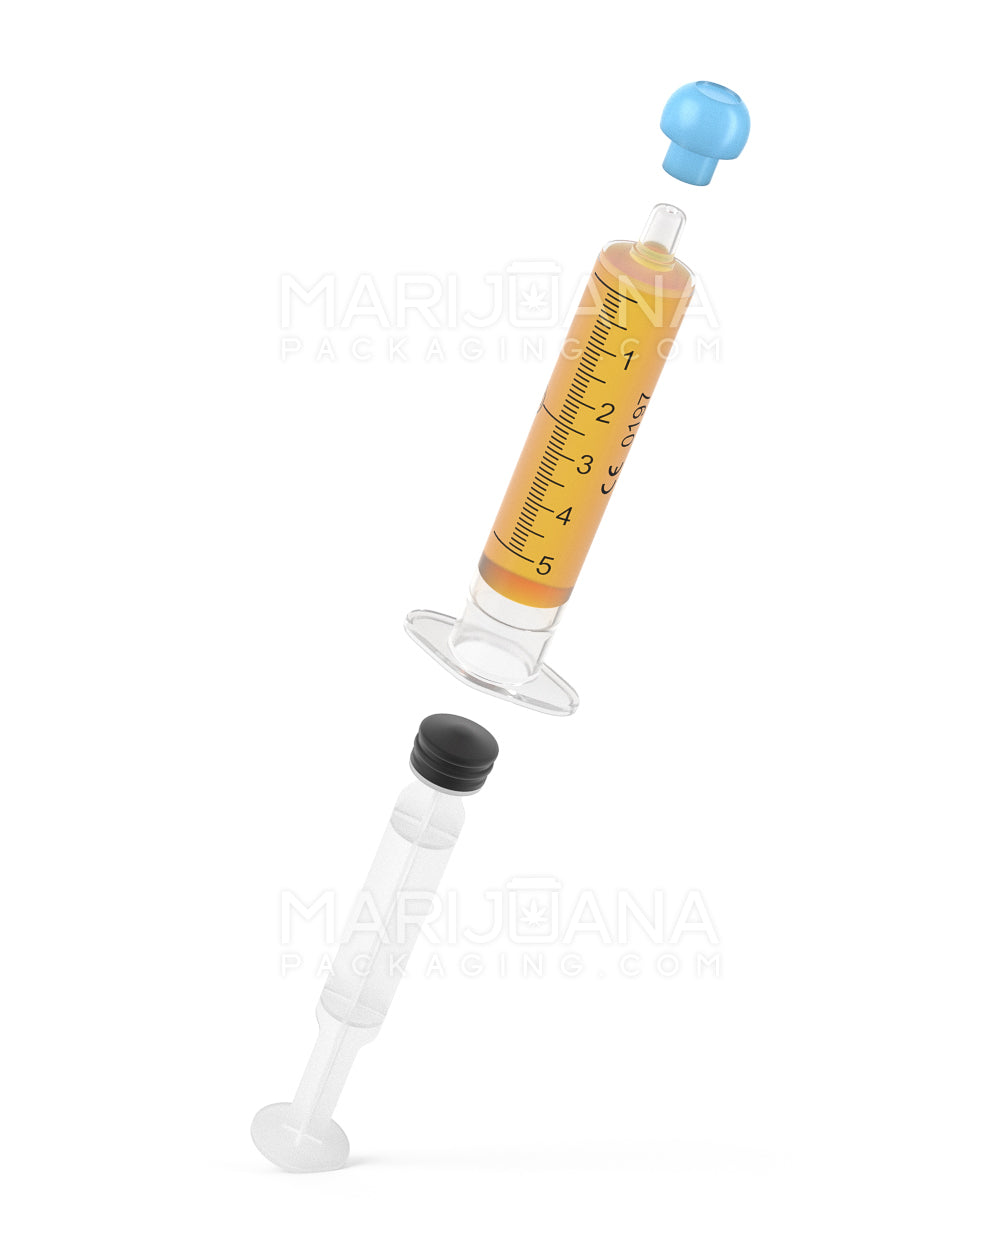 Plastic Oral Concentrate Syringes | 5mL - 1mL Increments - 100 Count - 7